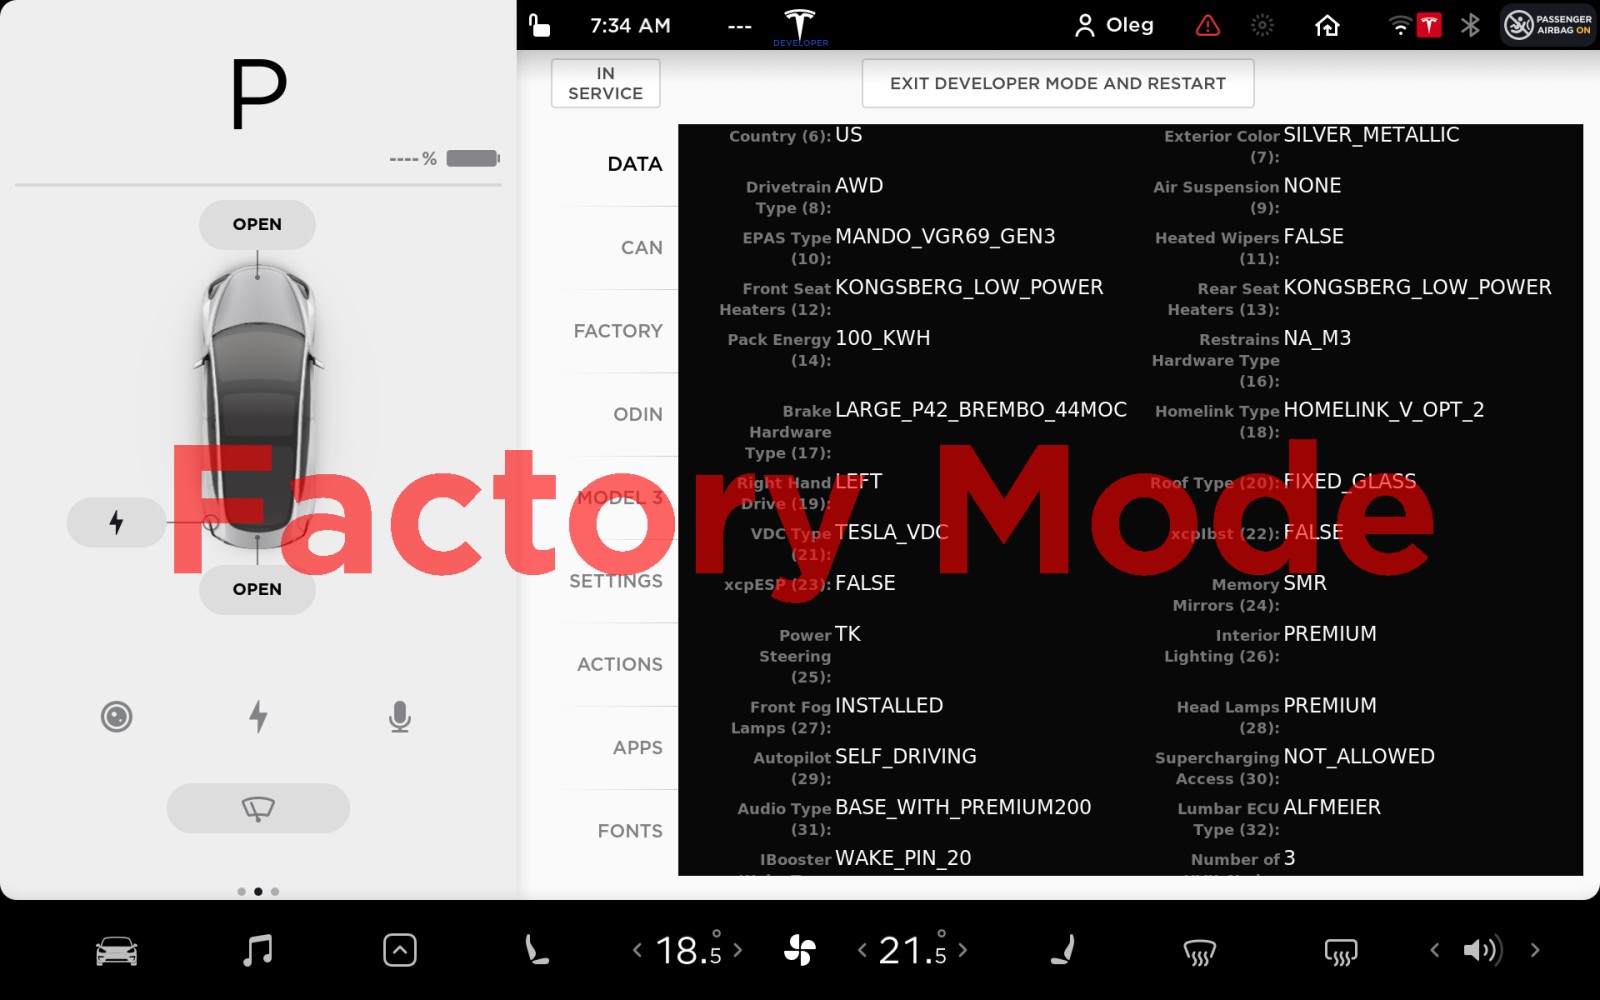 Tesla Model 3 with 100 kWh battery Factory Mode